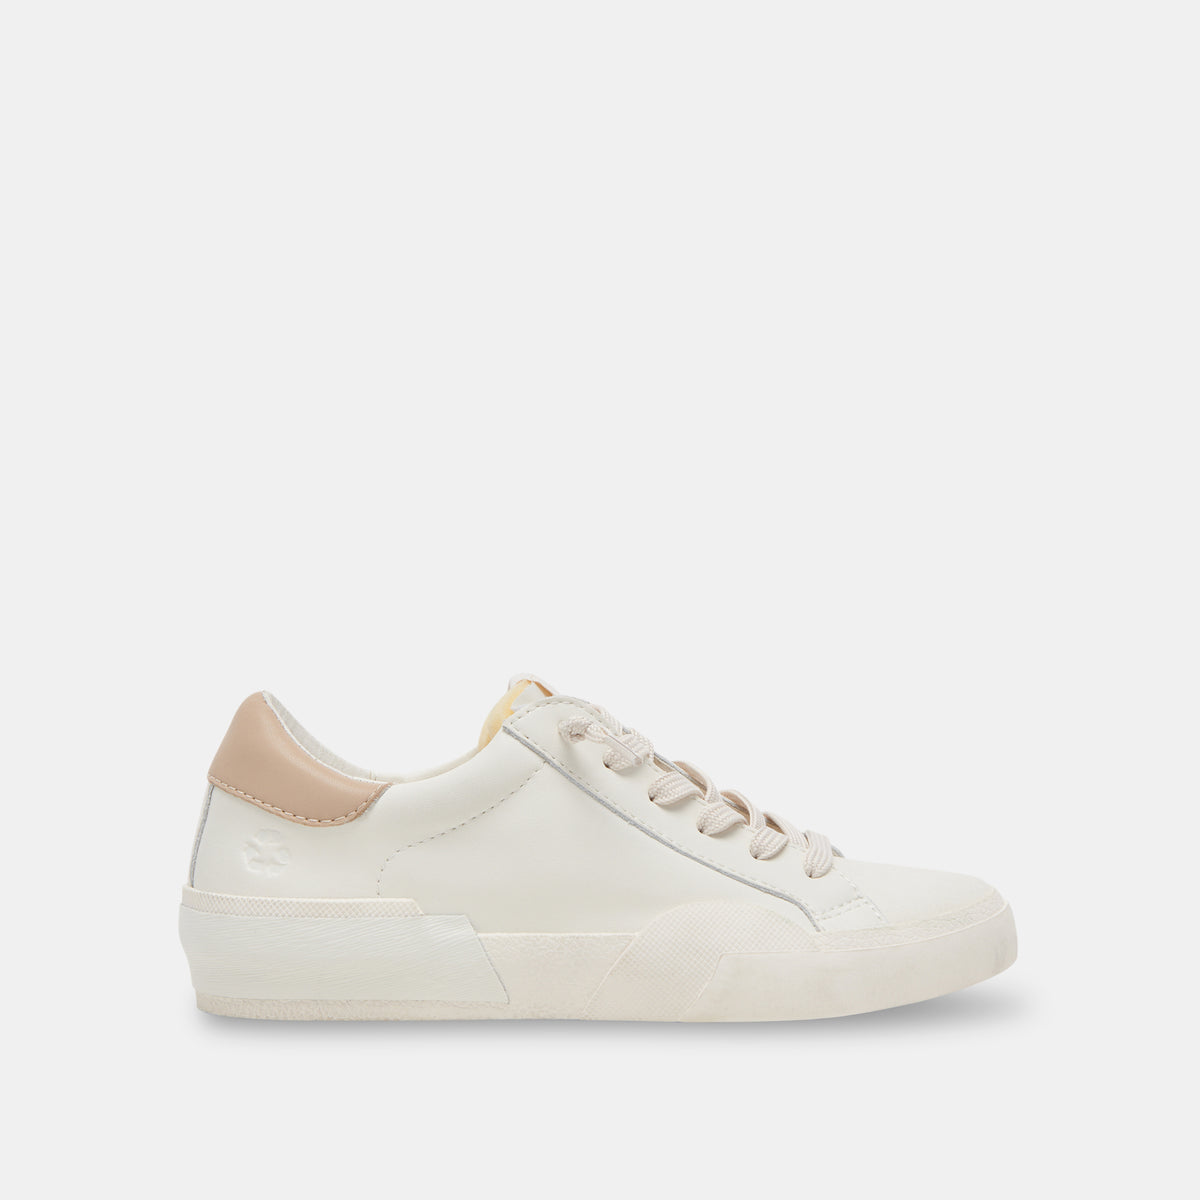 ZINA FOAM 360 SNEAKERS WHITE DUNE RECYCLED LEATHER – Dolce Vita